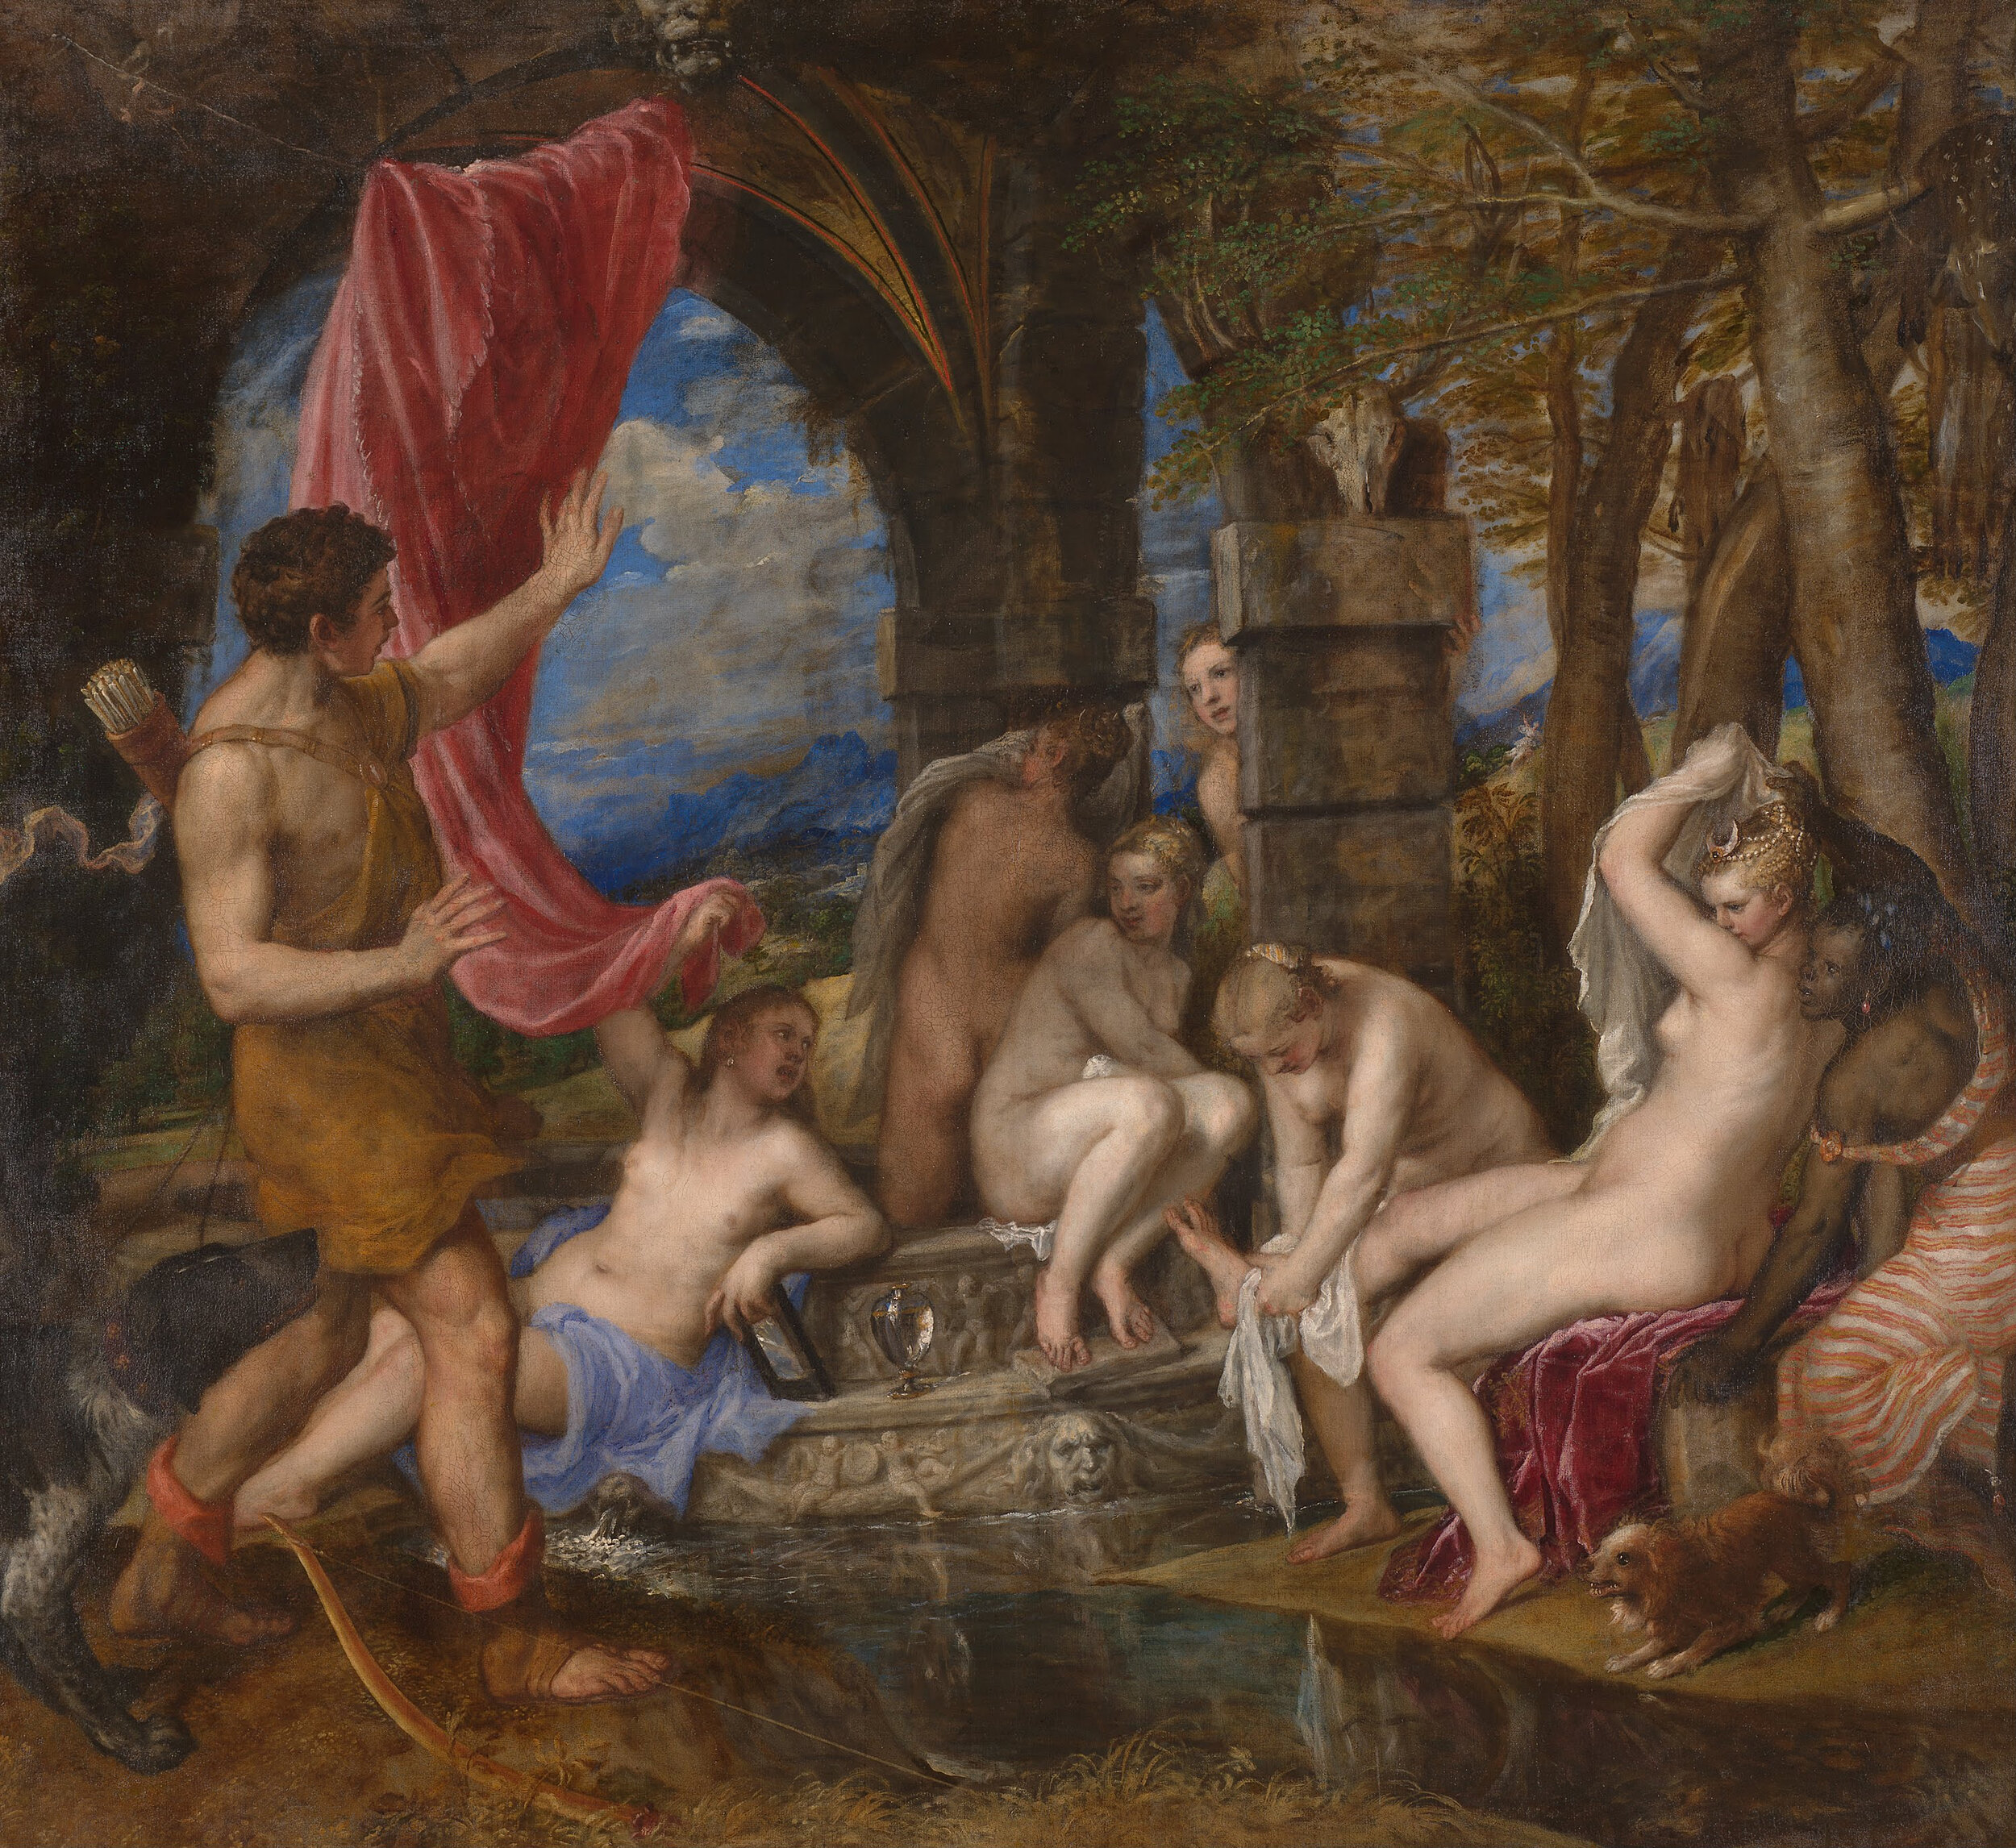 Titian_-_Diana_and_Actaeon_-_Google_Art_Project.jpg